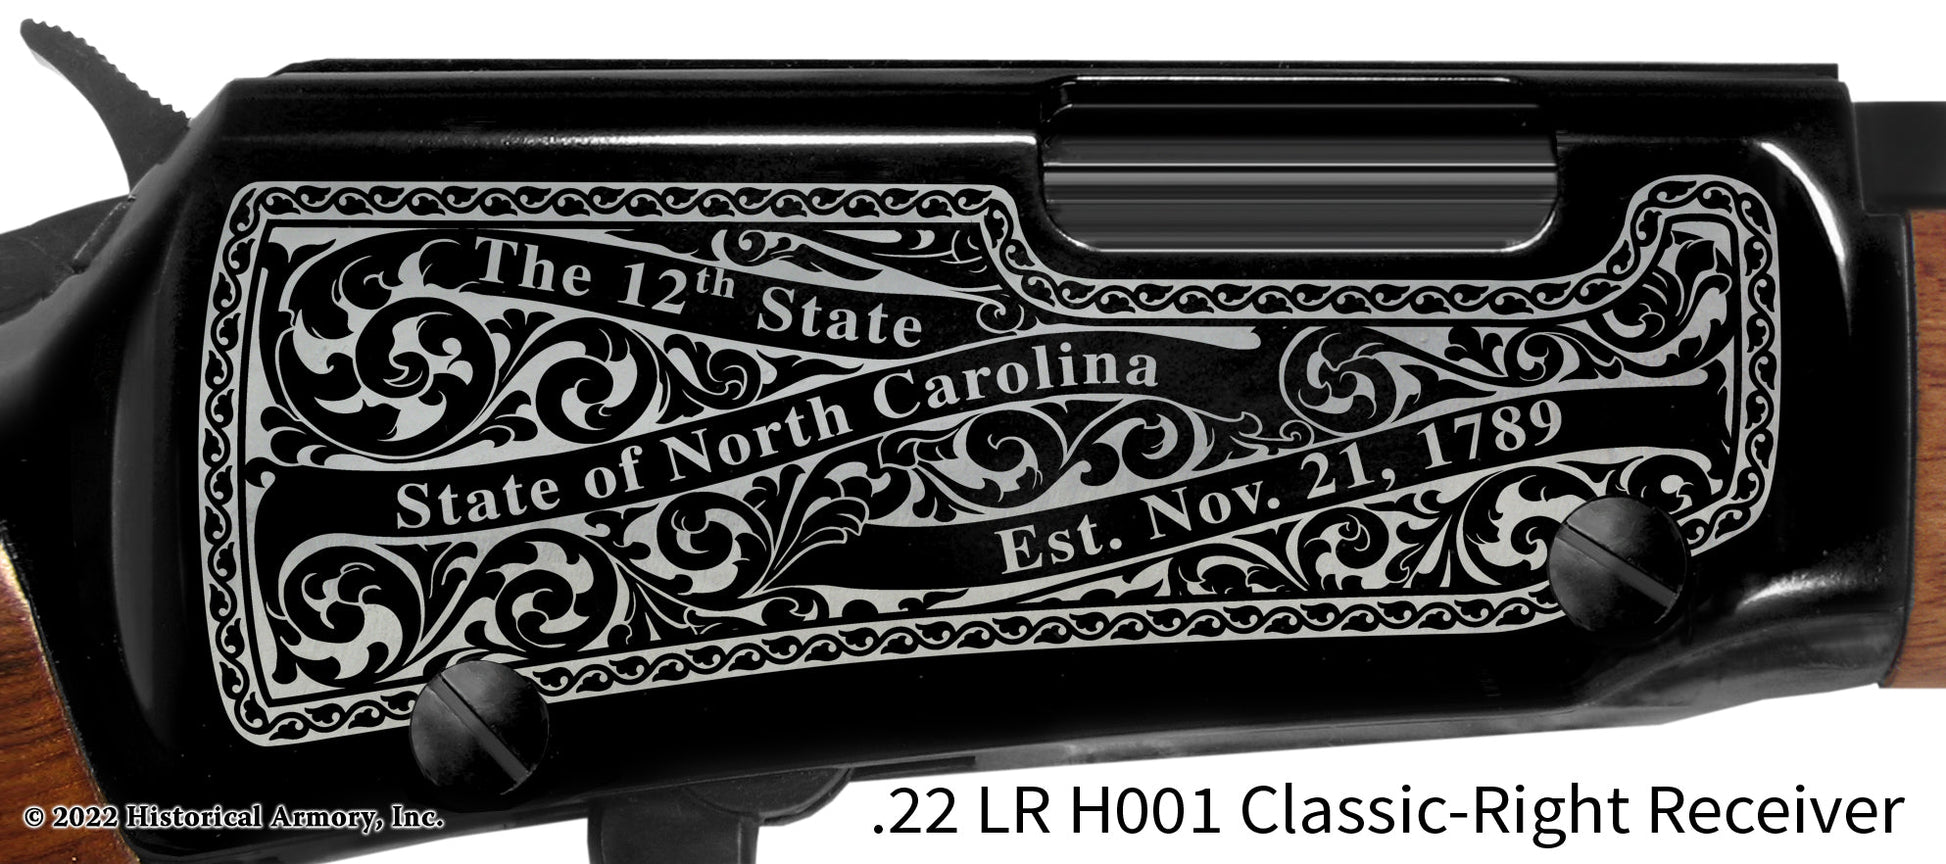 McDowell County North Carolina Engraved Henry H001 Rifle